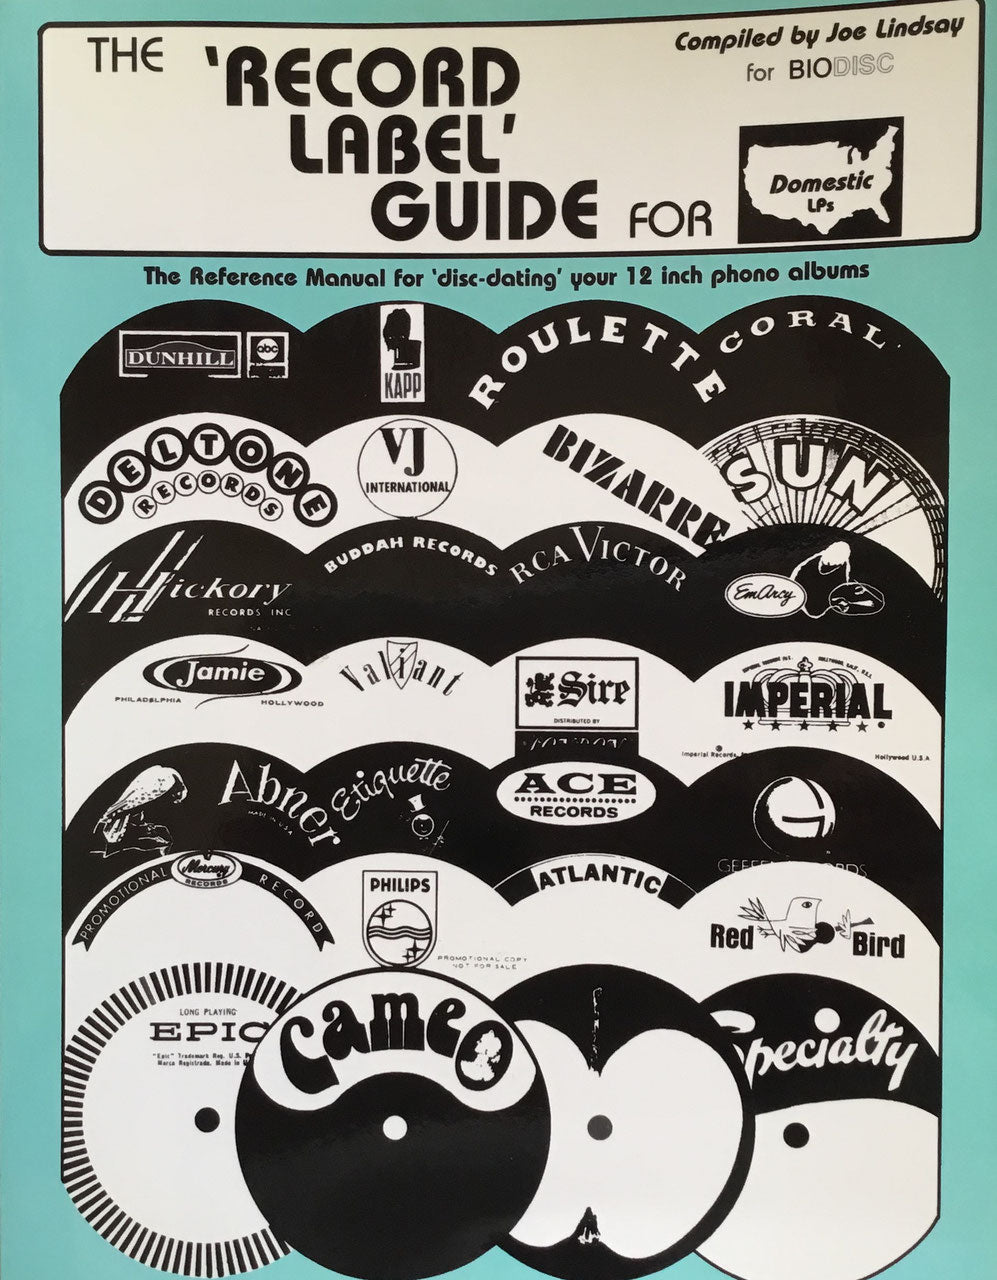 The Record Label Guide for Domestic LPs